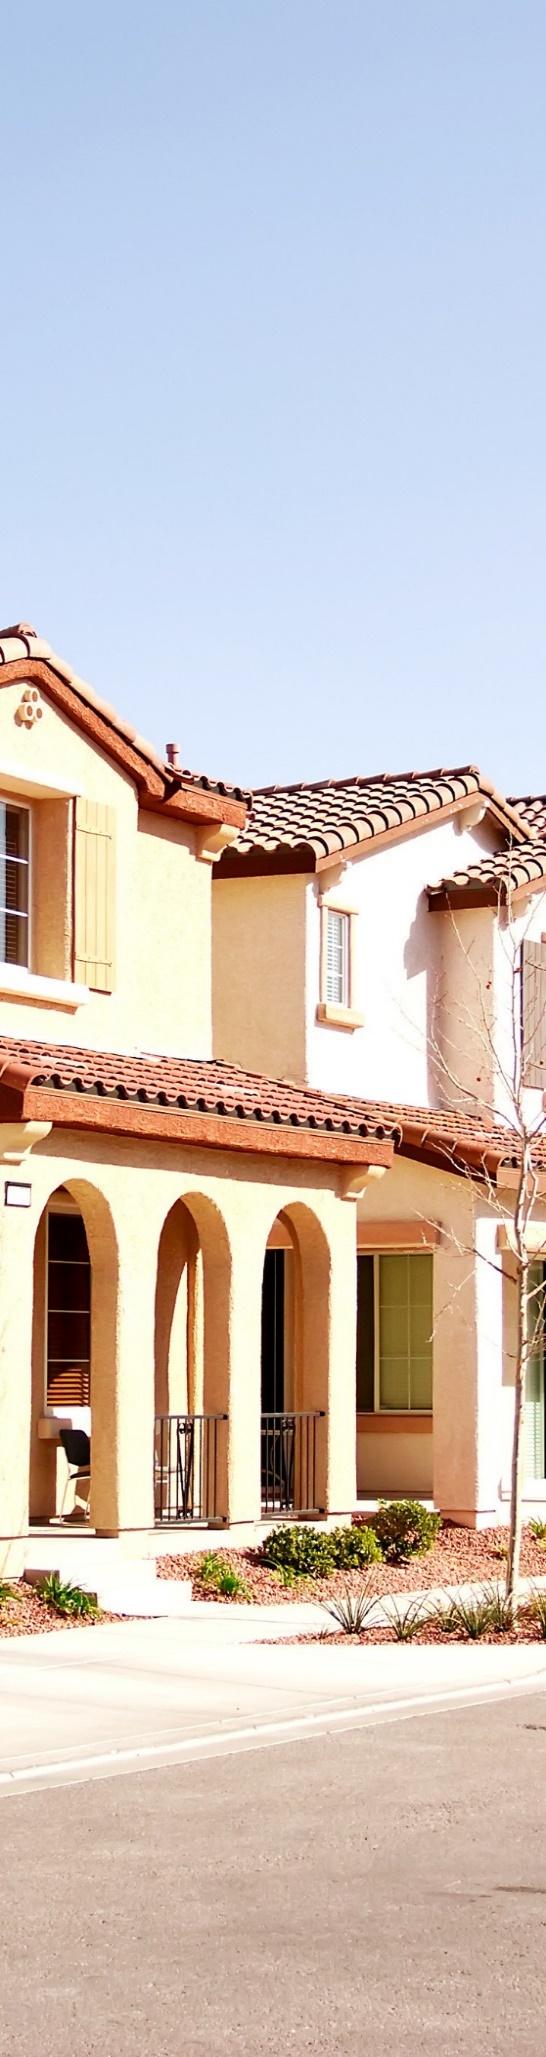 Boulder City saw a 27 percent year over year increase in price and the average existing single-family home price was $409,000.